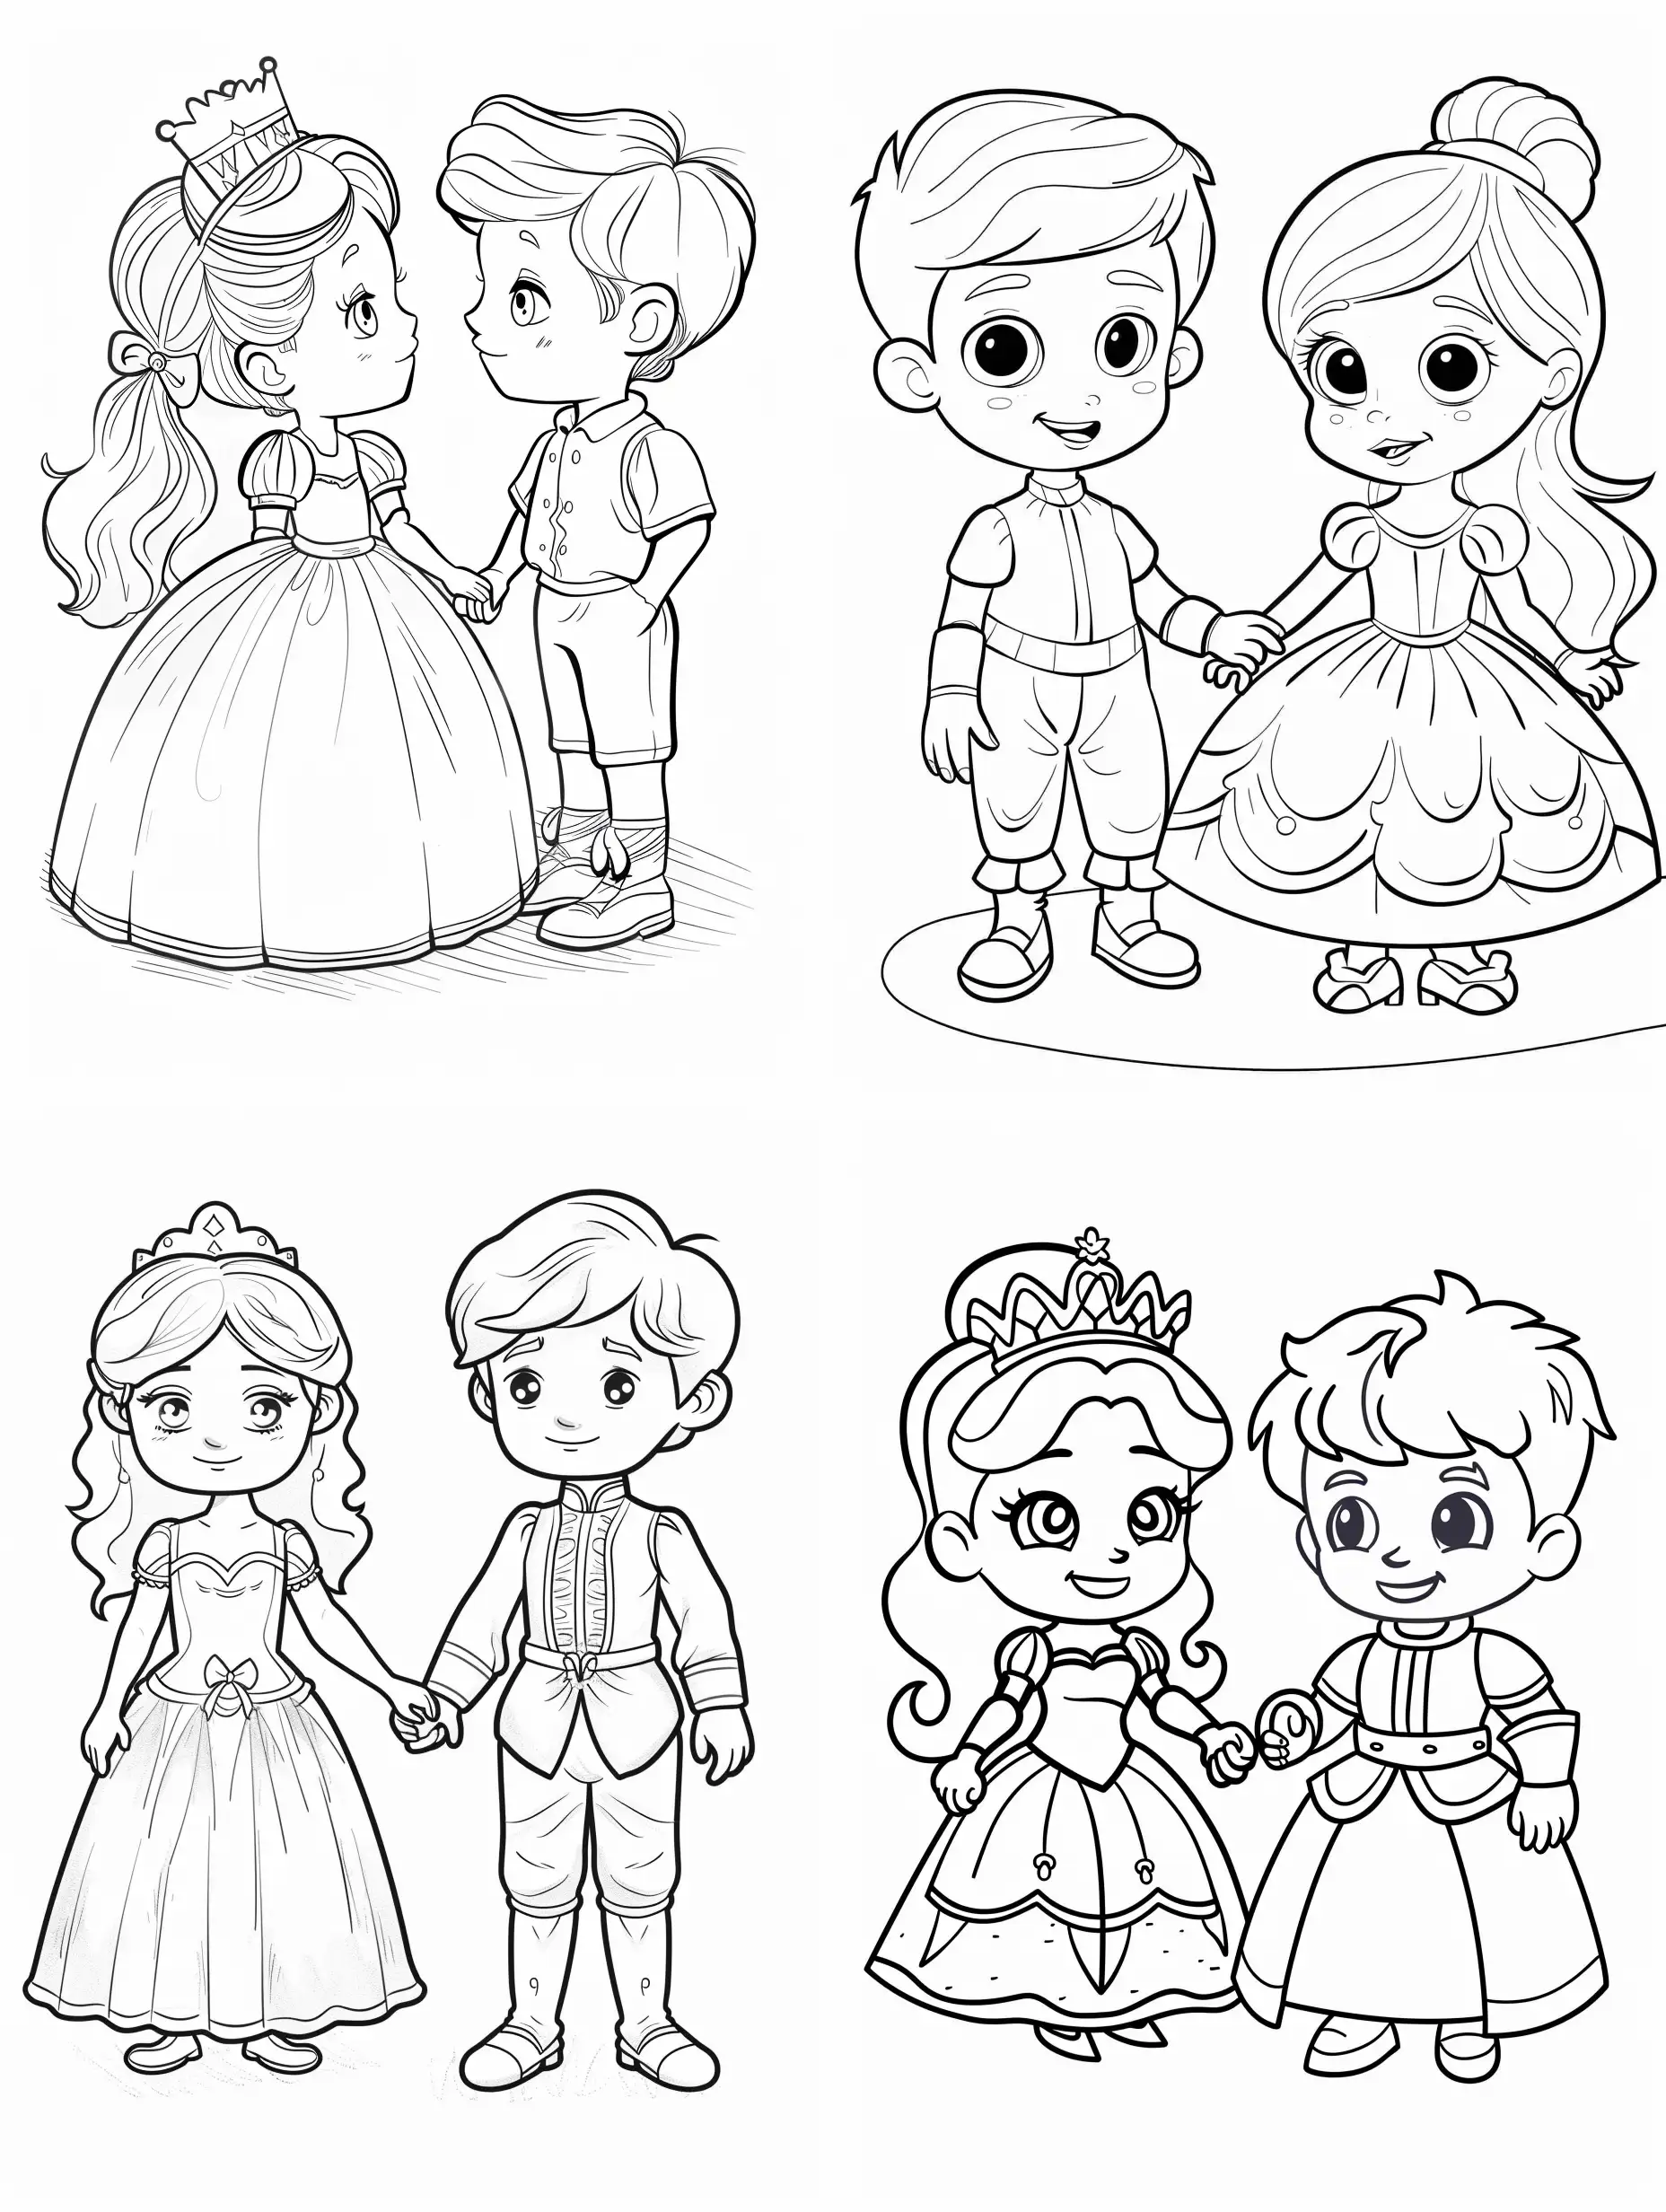 Adorable-Princess-and-Prince-Coloring-Book-Illustration-on-White-Background